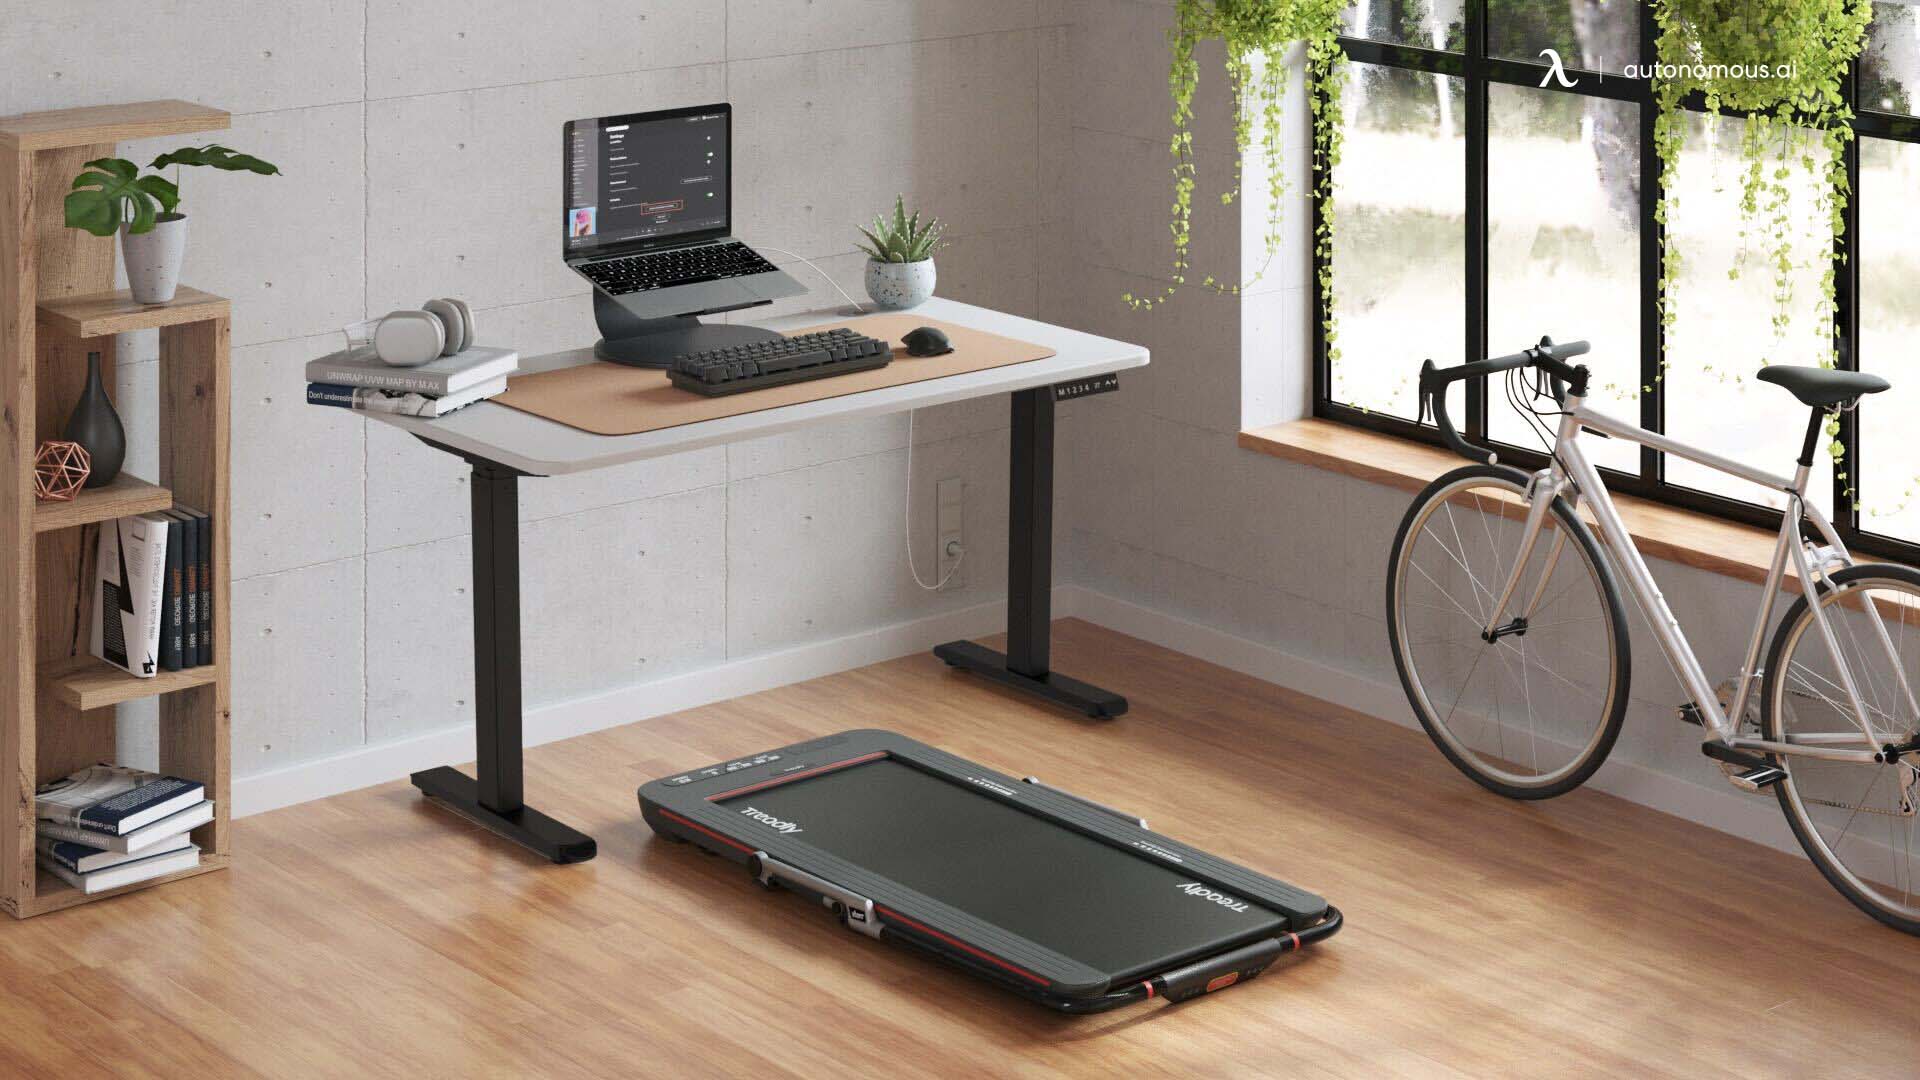 Treadmill desk can help you spend less time inactive at work.